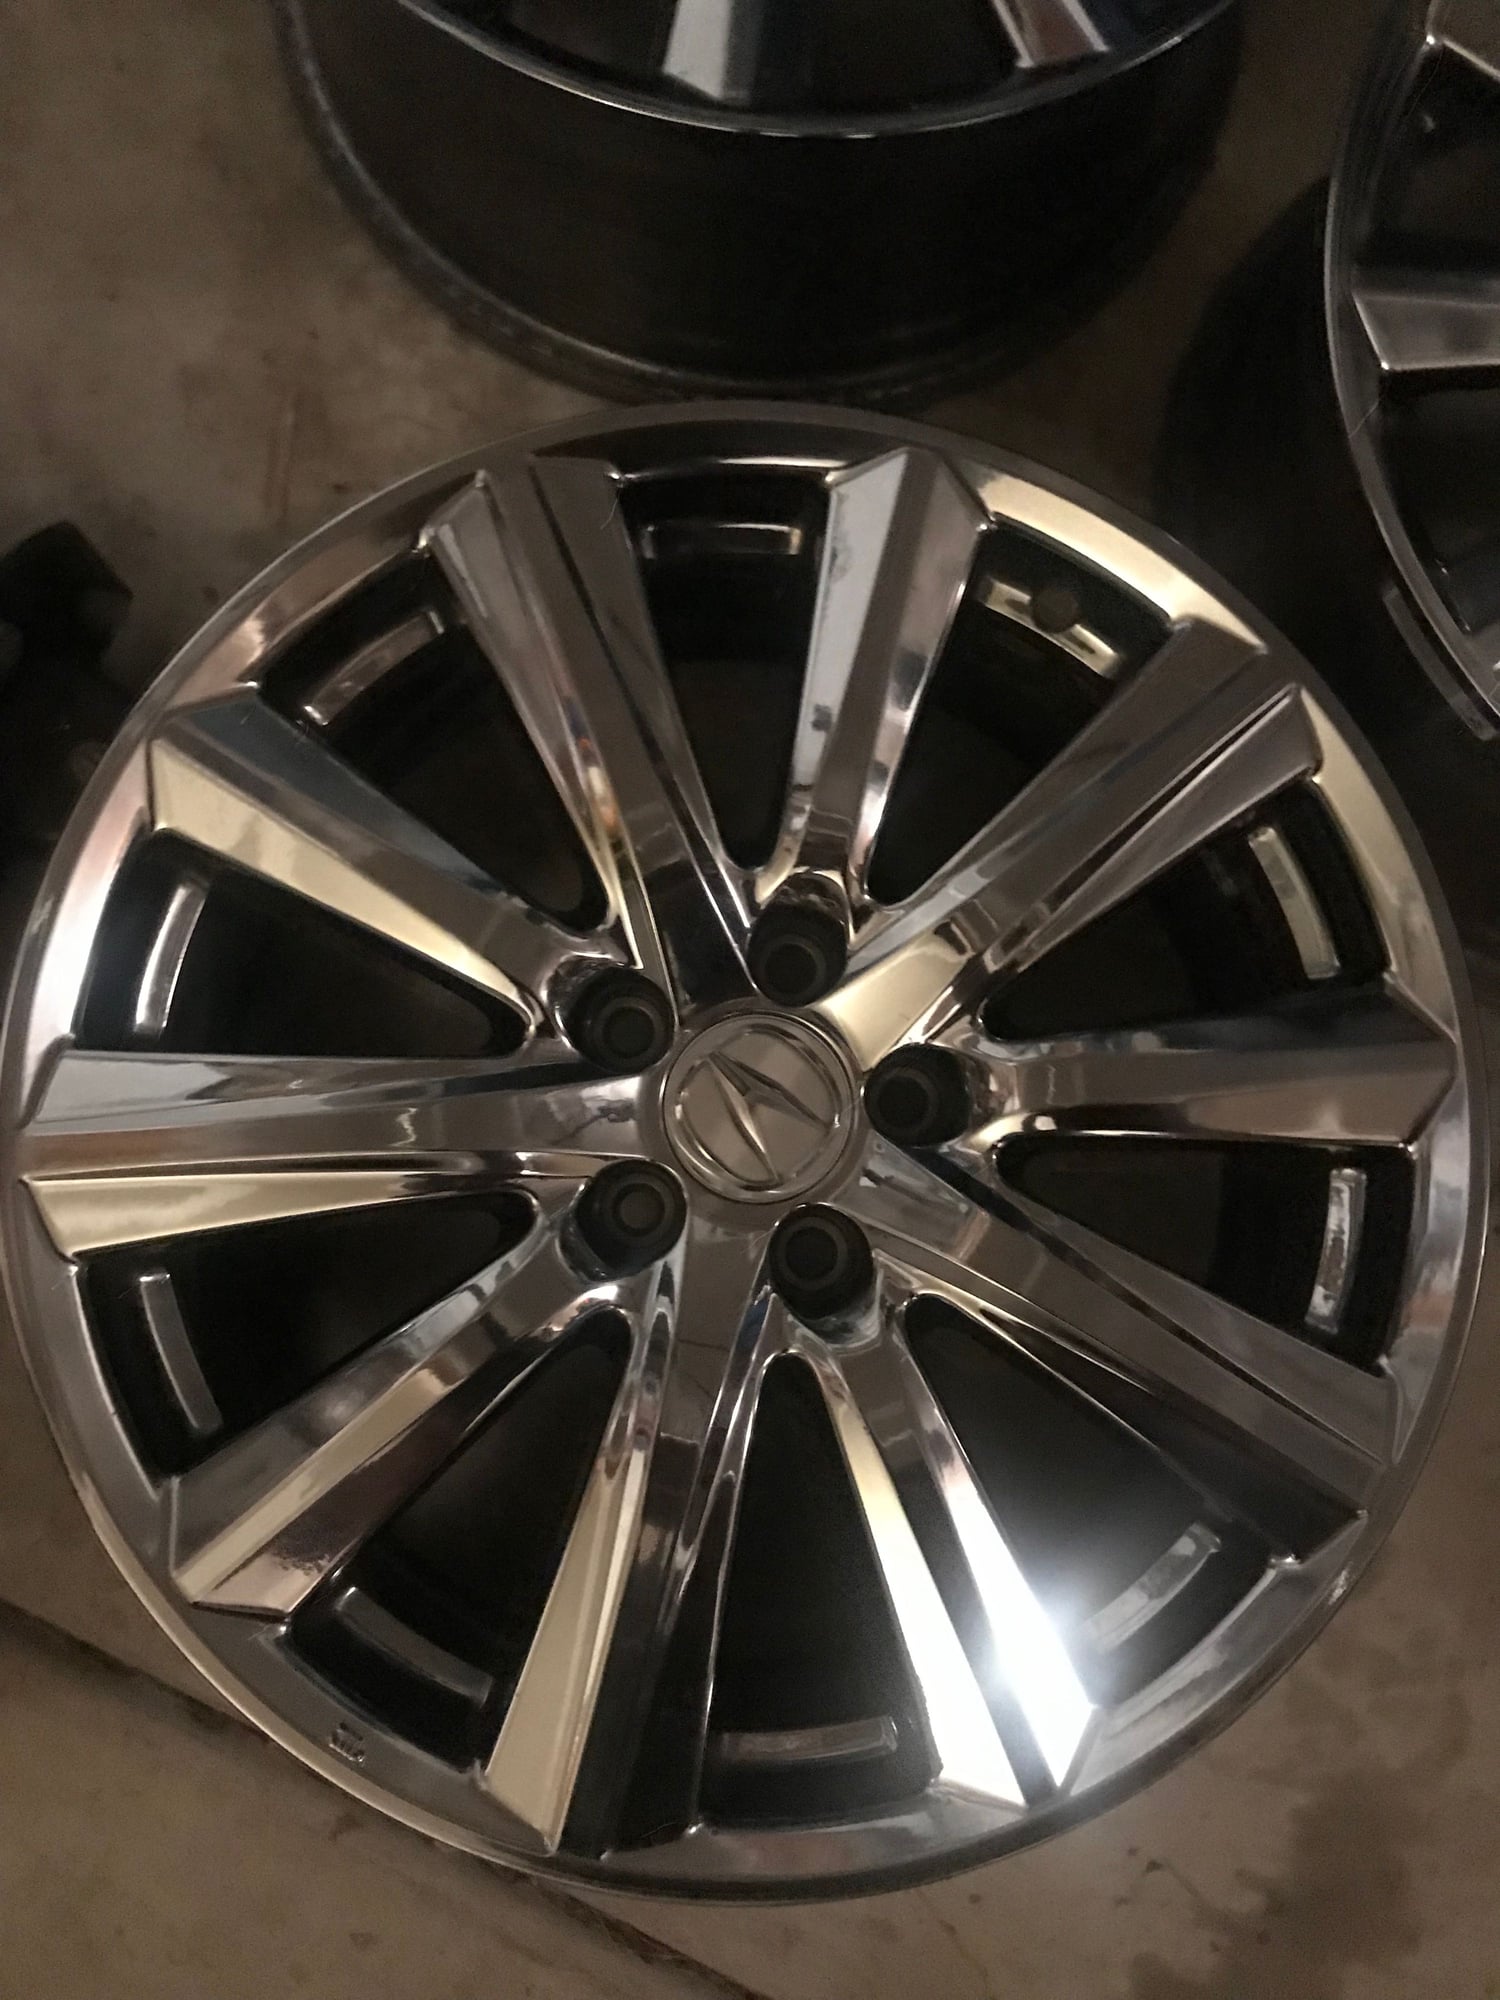 Wheels and Tires/Axles - FS: 2014+ Acura MDX 5x114 19x8 PVD chrome wheels - Used - 2015 to 2019 Acura TLX - 2014 to 2019 Acura MDX - 2004 to 2008 Acura TL - 2007 to 2019 Acura RDX - Chicago, IL 60417, United States